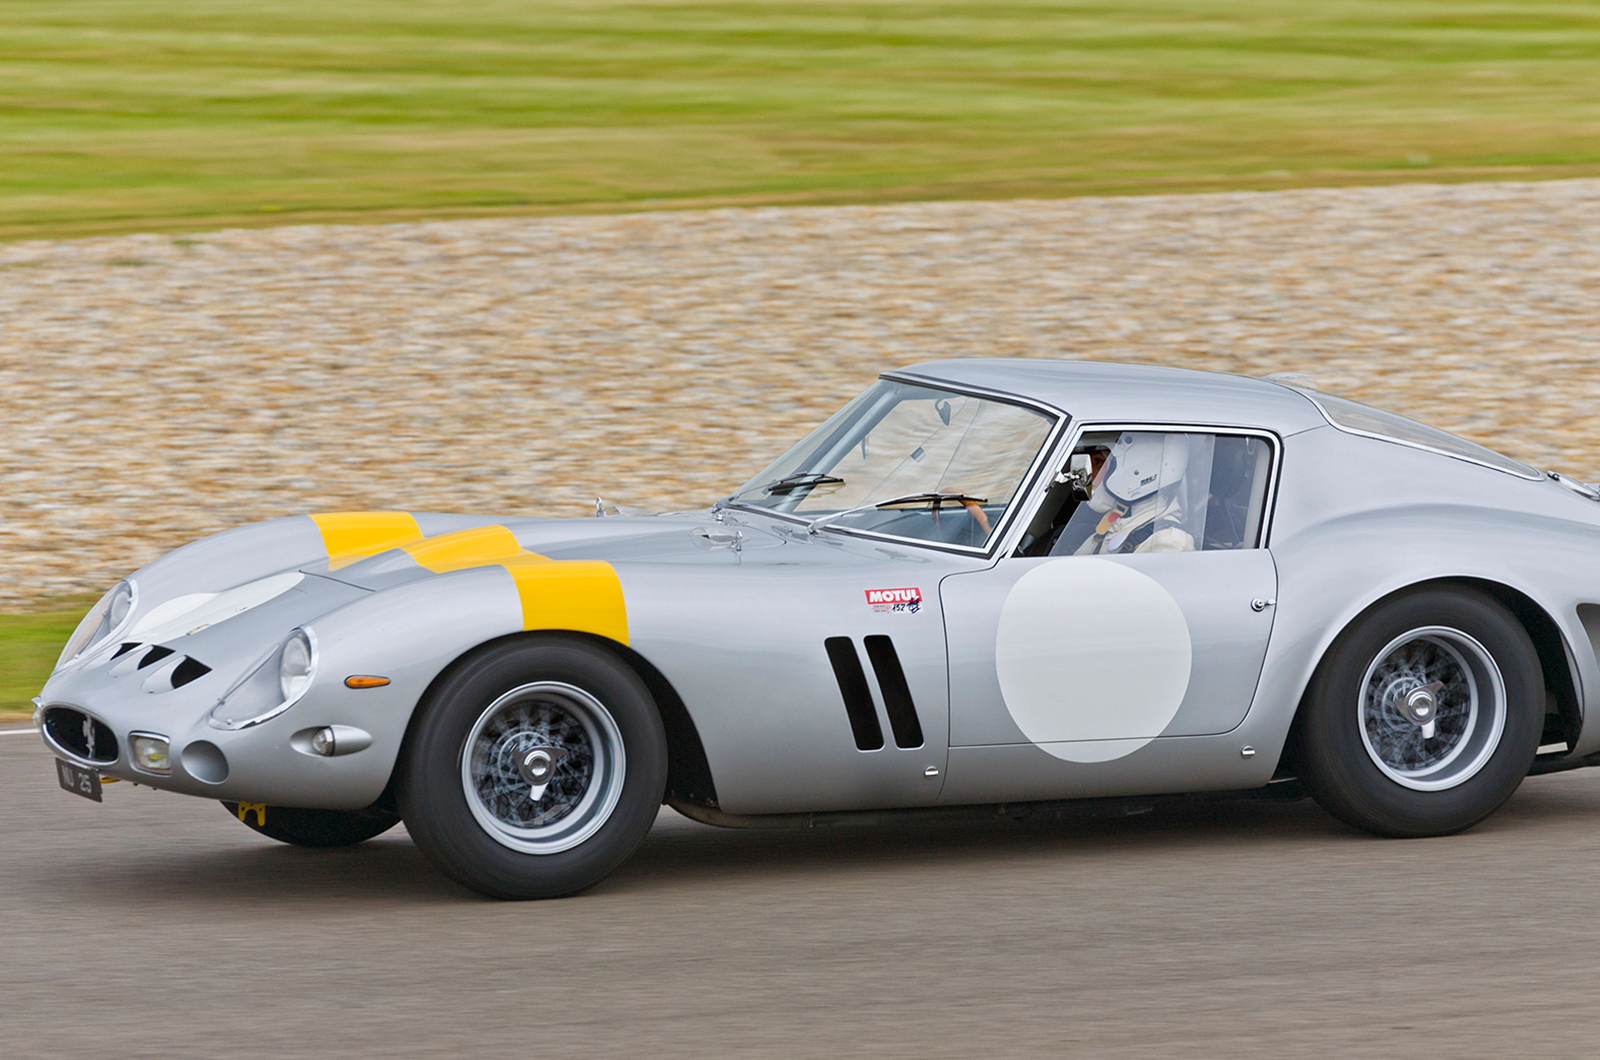 This Ferrari 250GTO is now the most expensive car ever